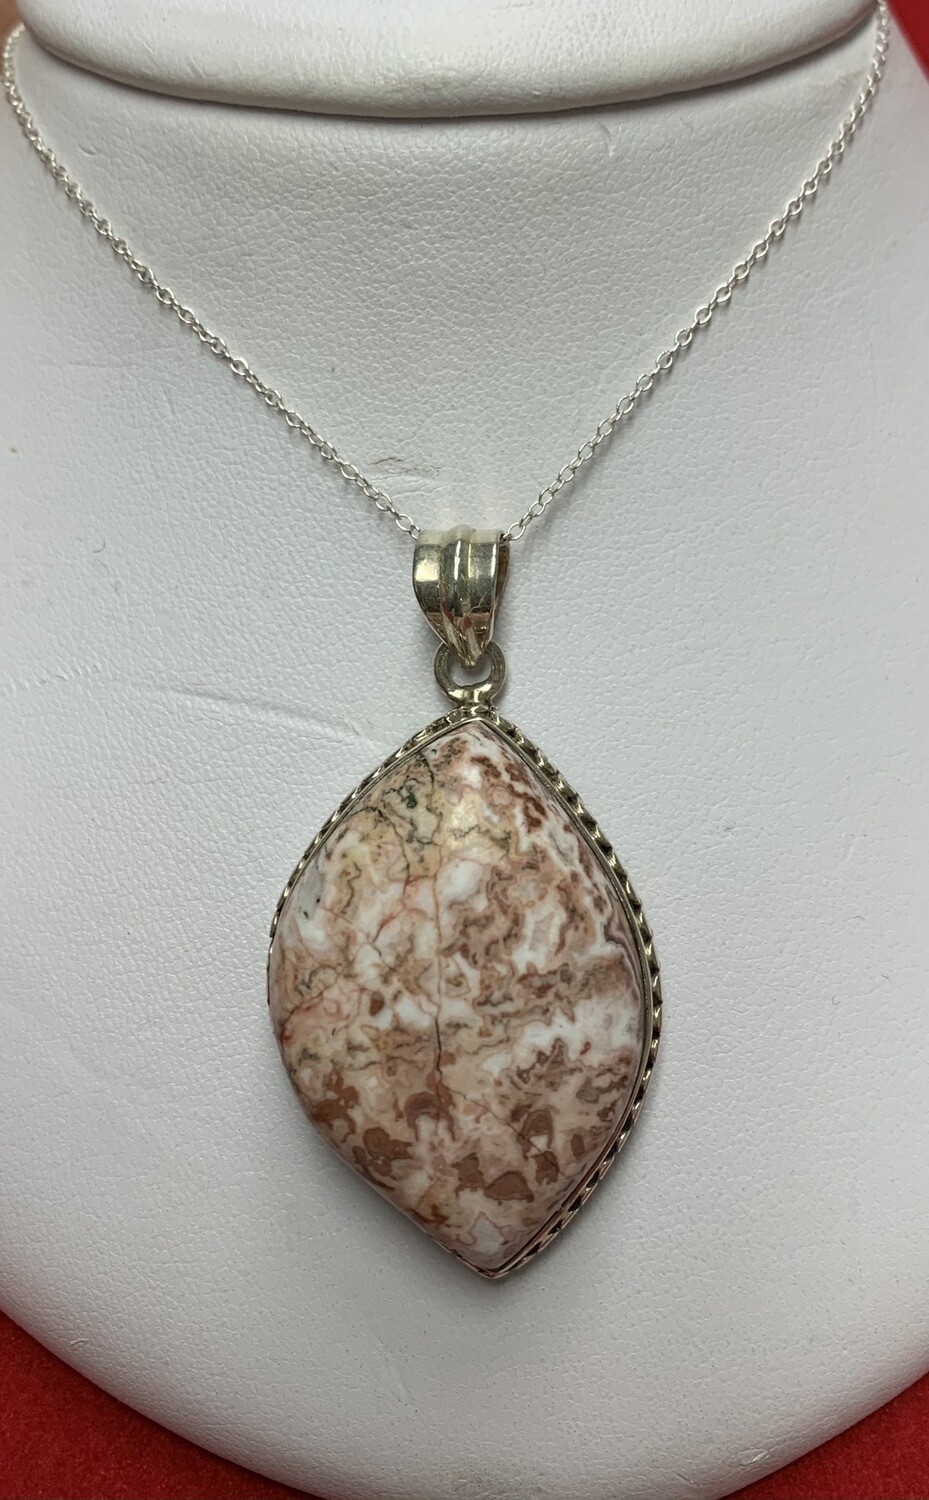 Crazy Lace Agate Pendant Sterling Silver Chain